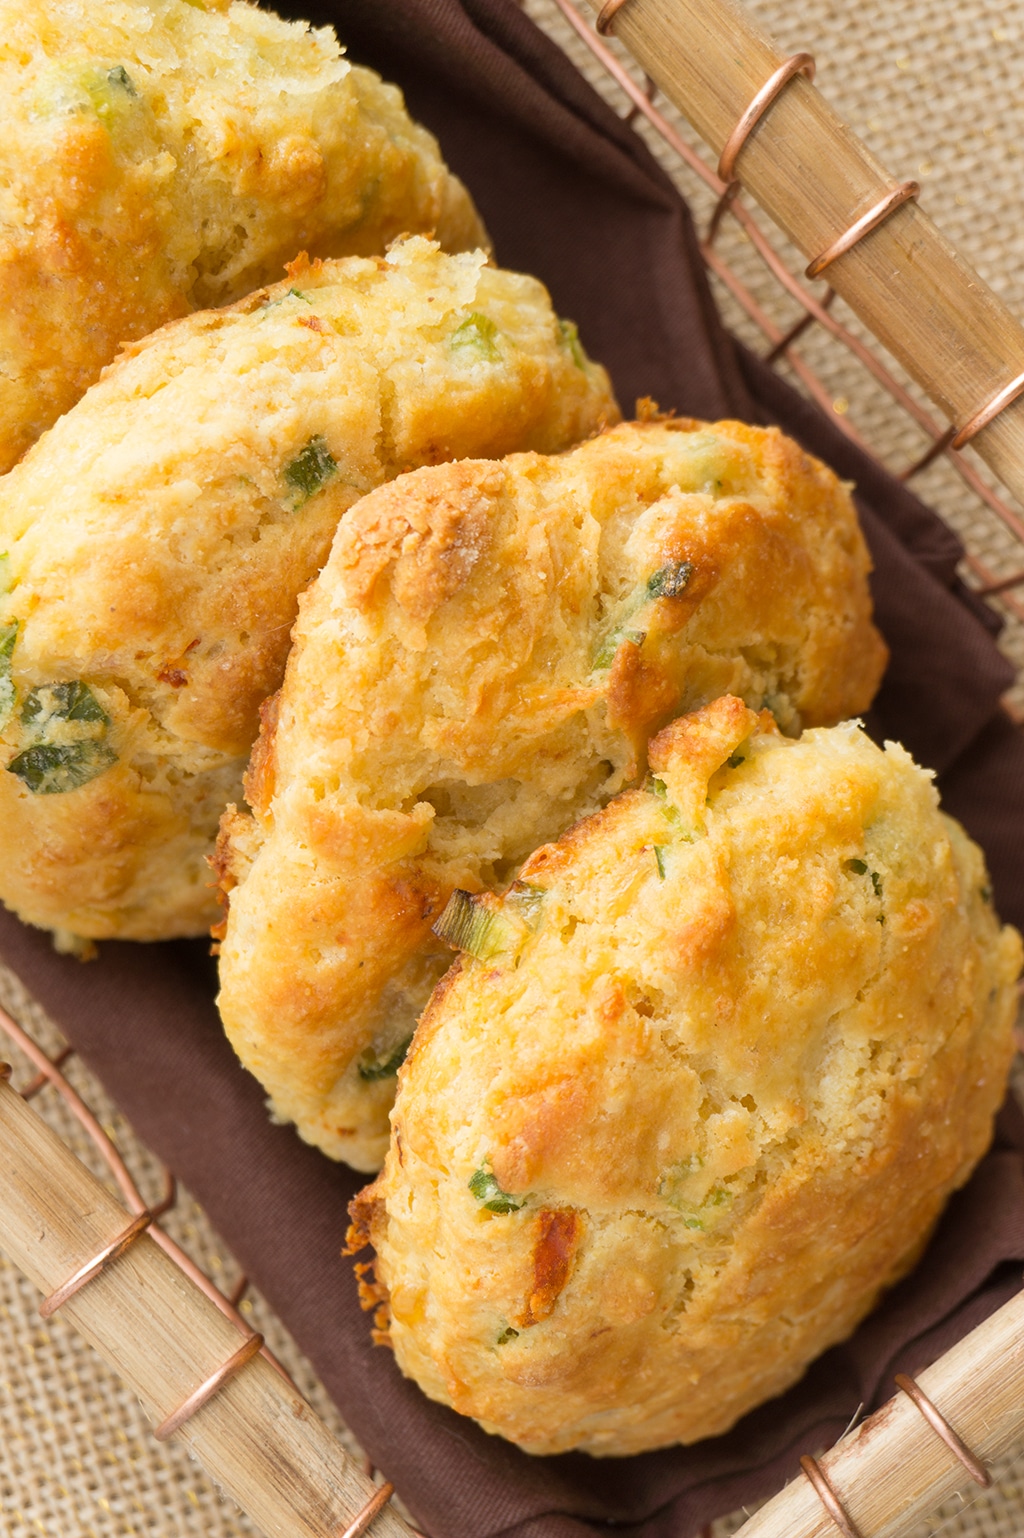 White Cheddar Chipotle Cornmeal Biscuits